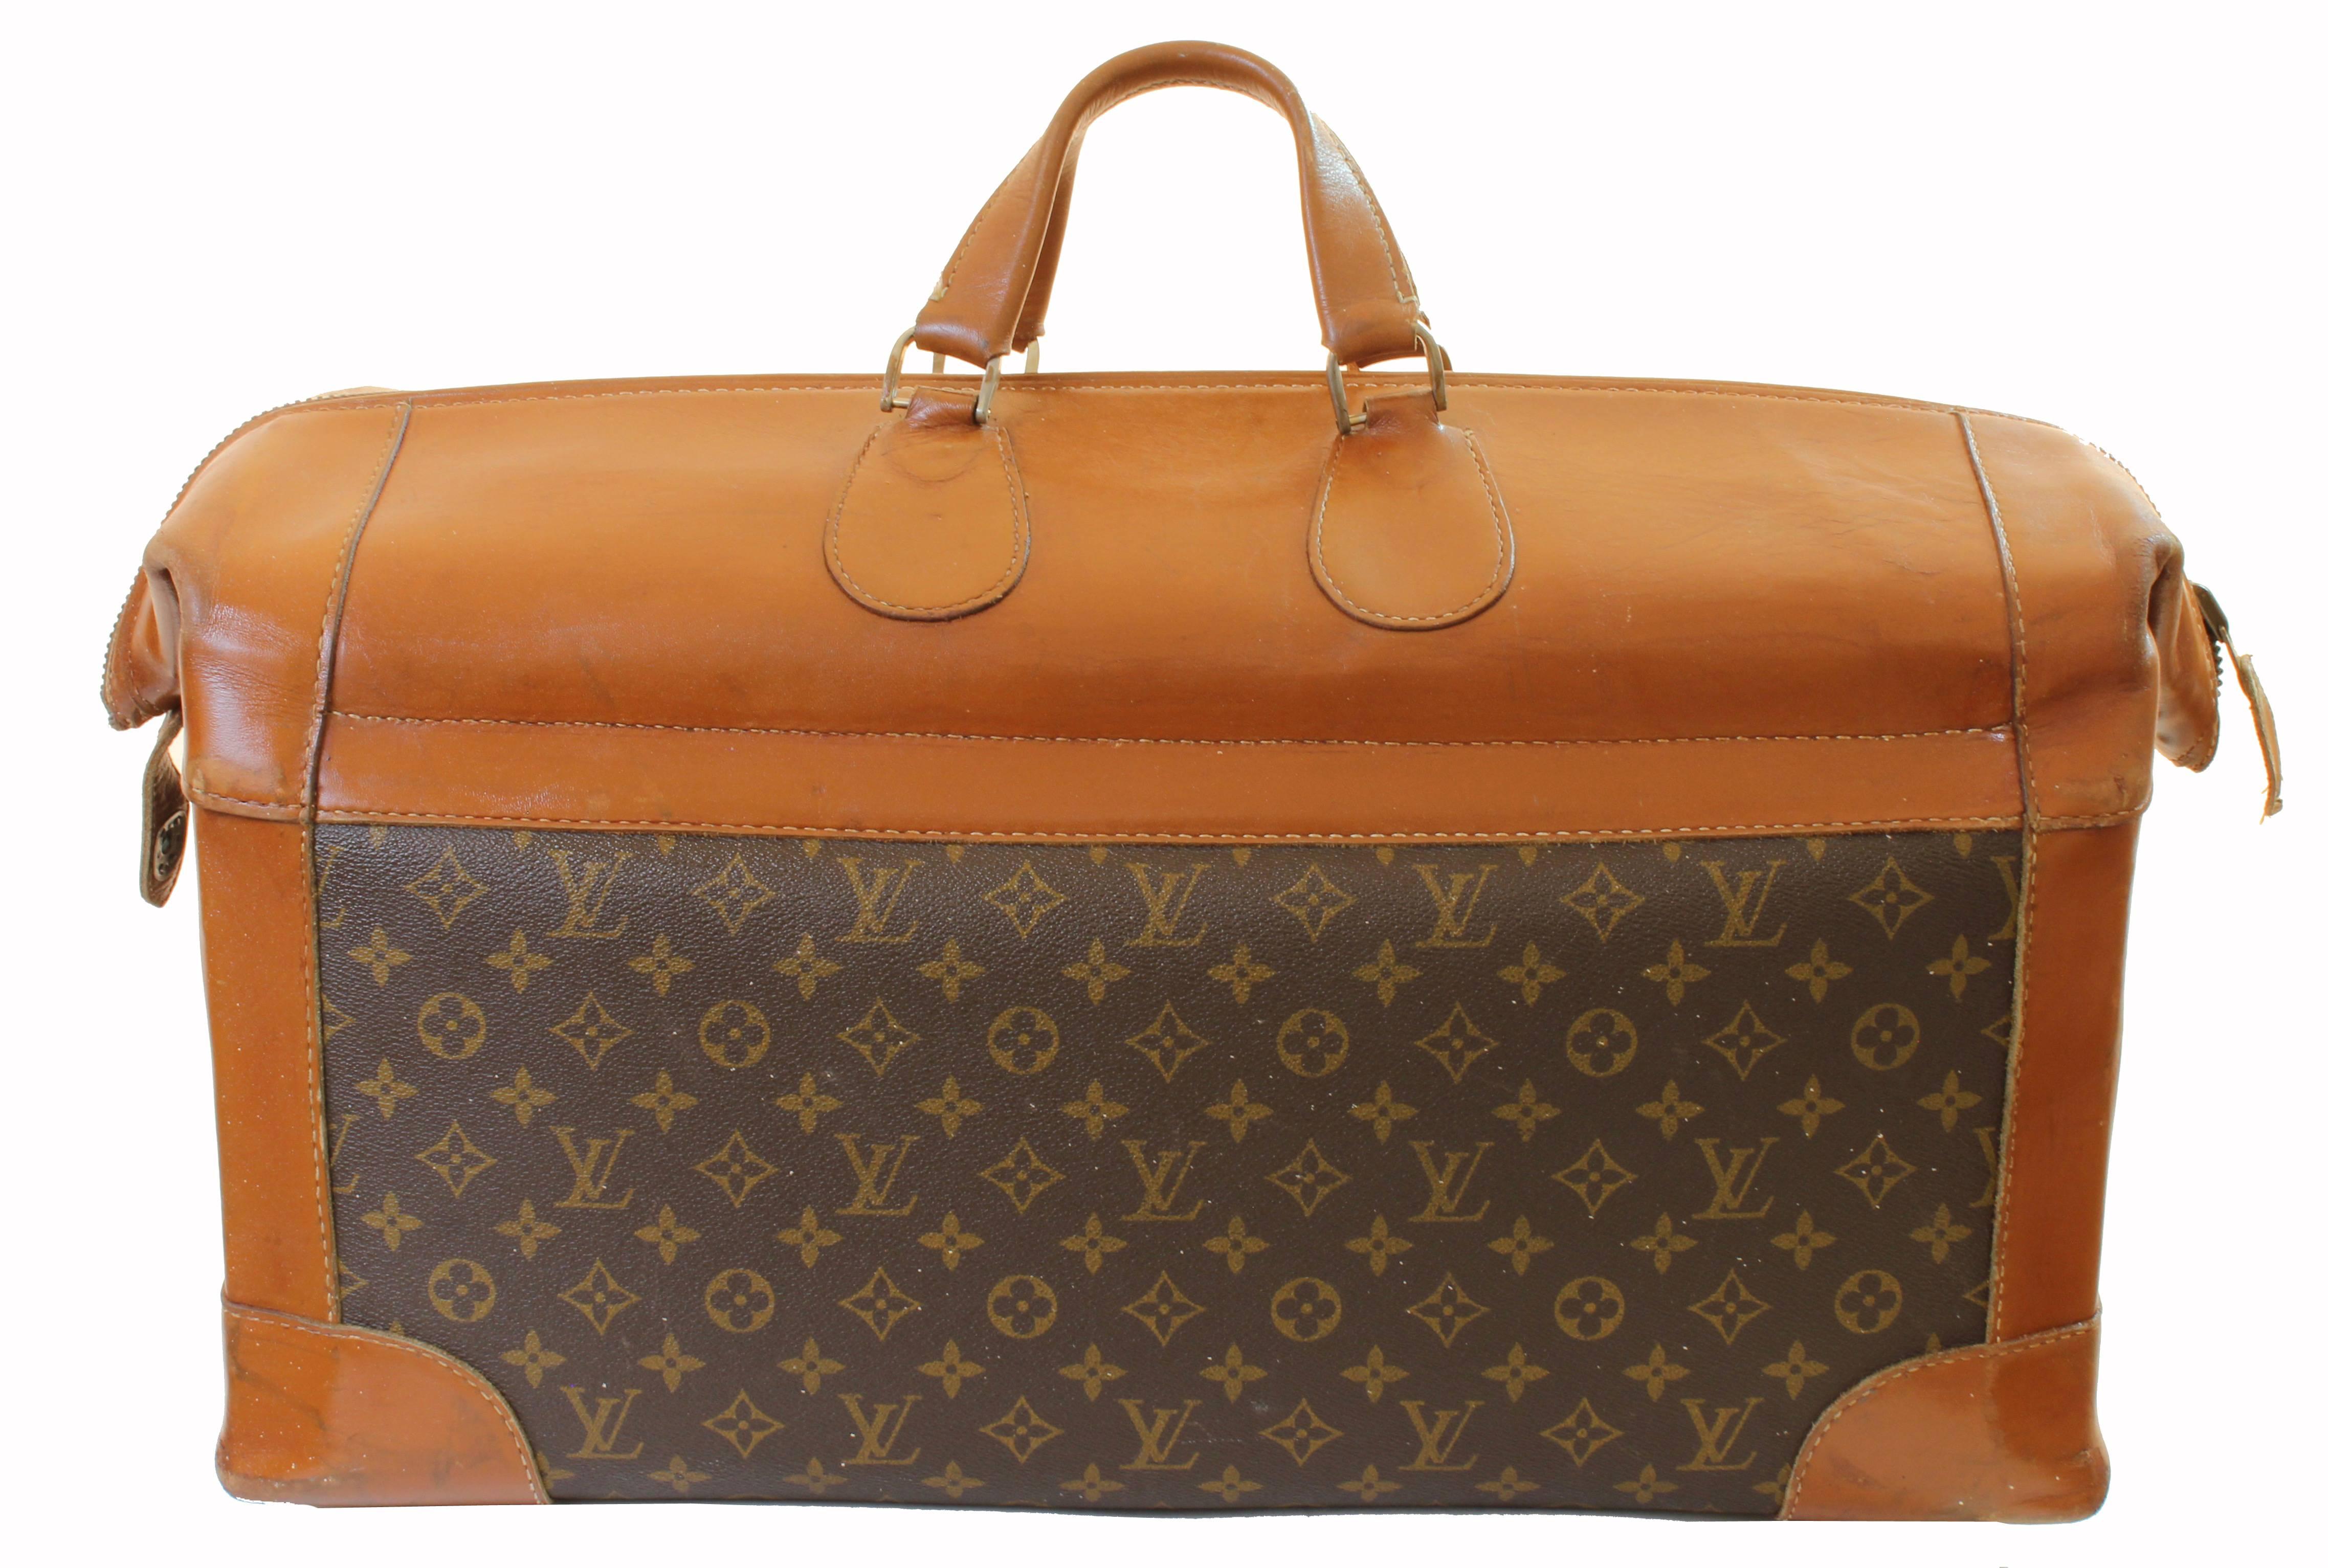 Travel in style with this ultra rare travel bag from Louis Vuitton!  It was made by The French Company under special license from Louis Vuitton, most likely in the early 1970s, and long before LV had a manufacturing presence n the USA. These US made